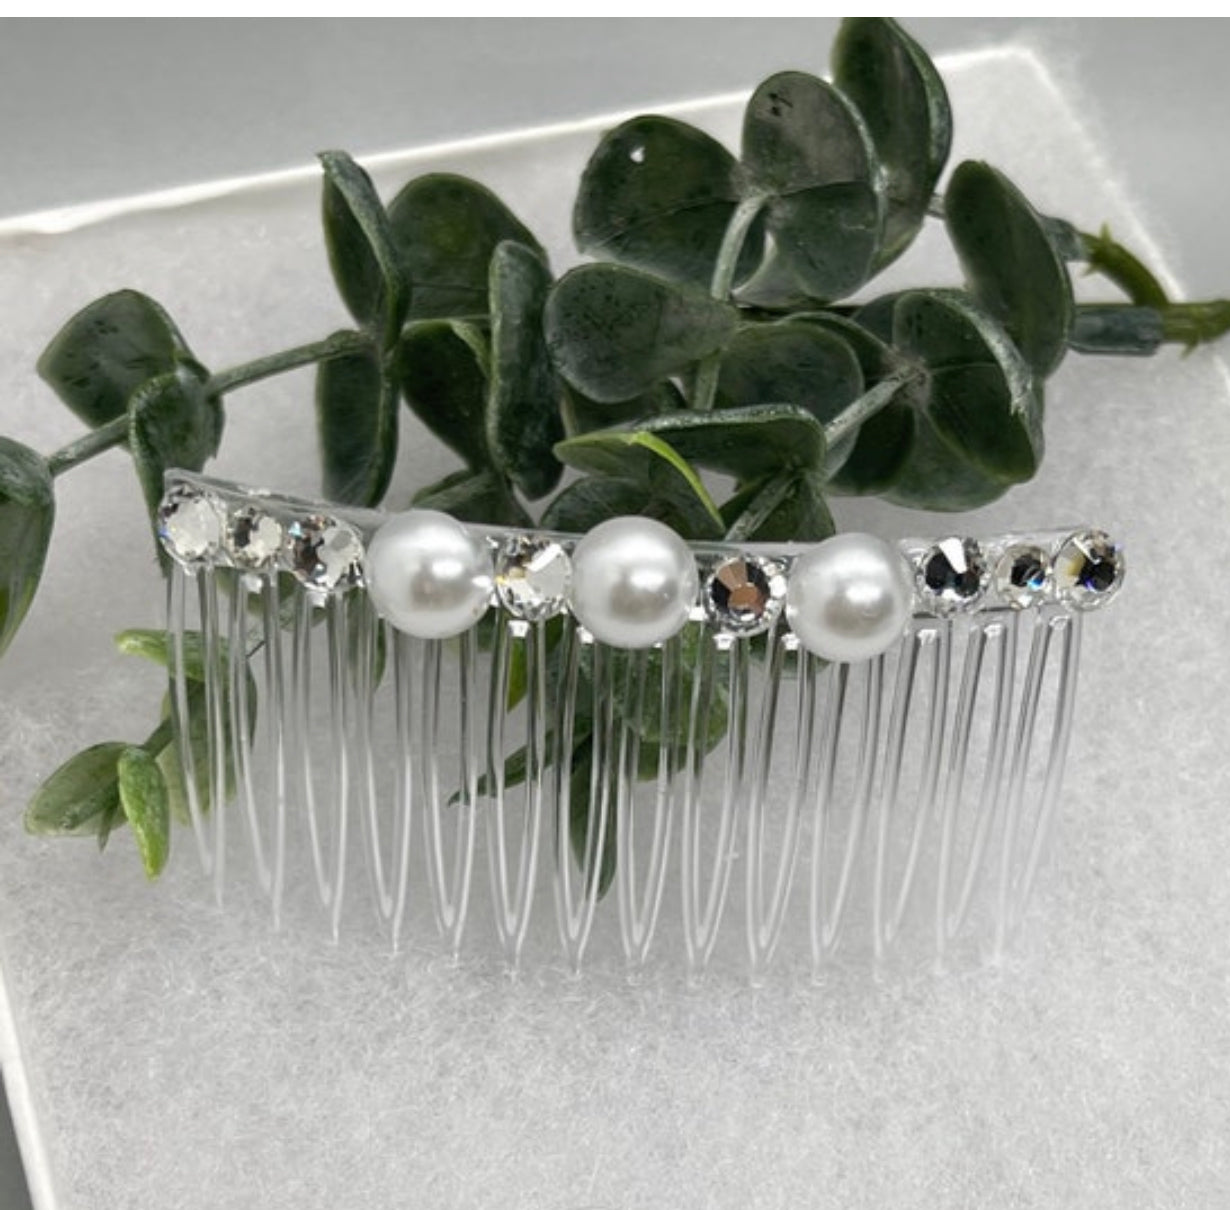 White bridal crystal Rhinestone Pearl hair comb accessory side Comb 3.5” clear plastic side Comb #007